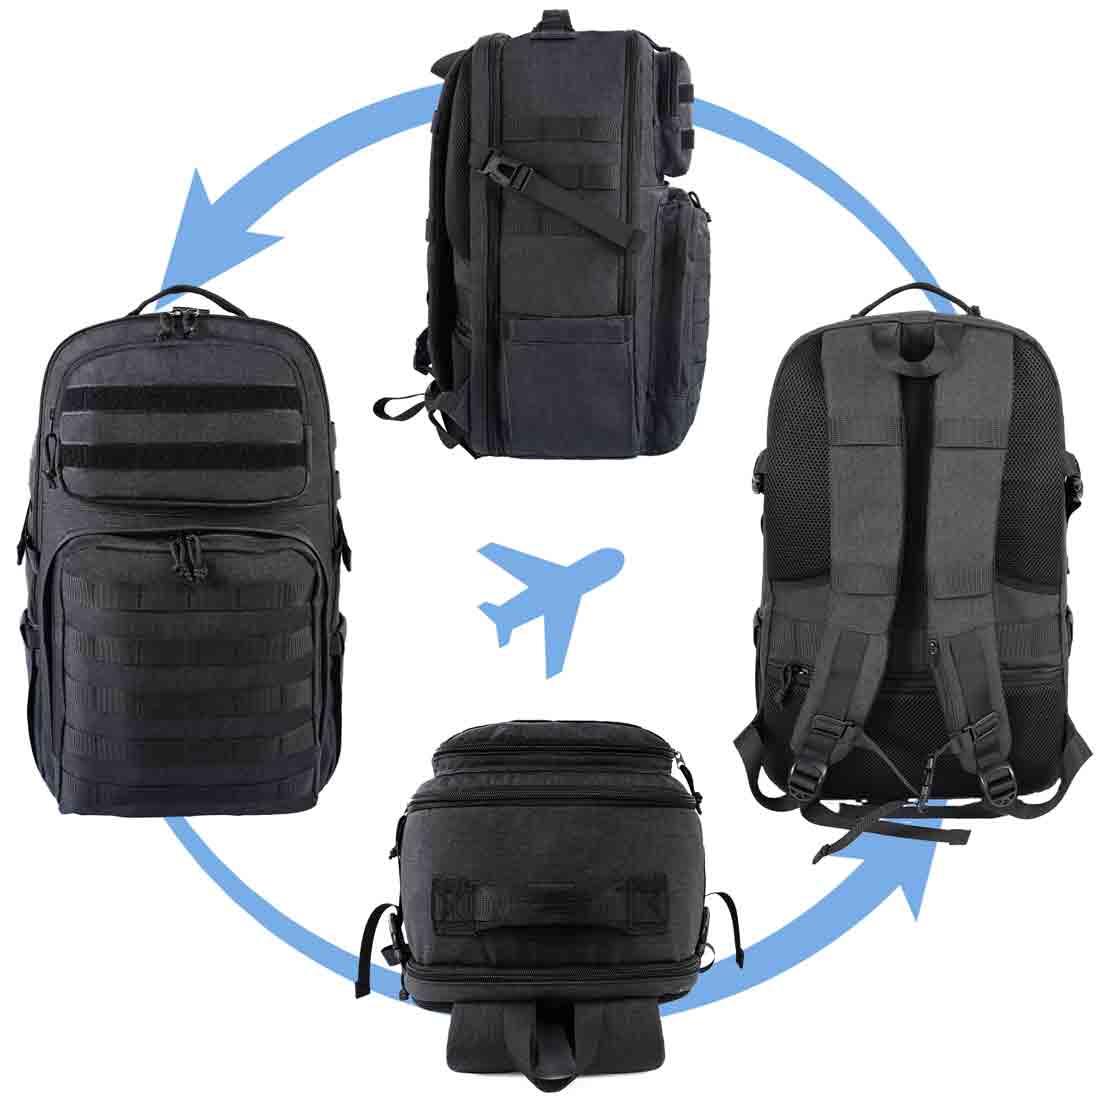 Matein Black Tactical Backpack